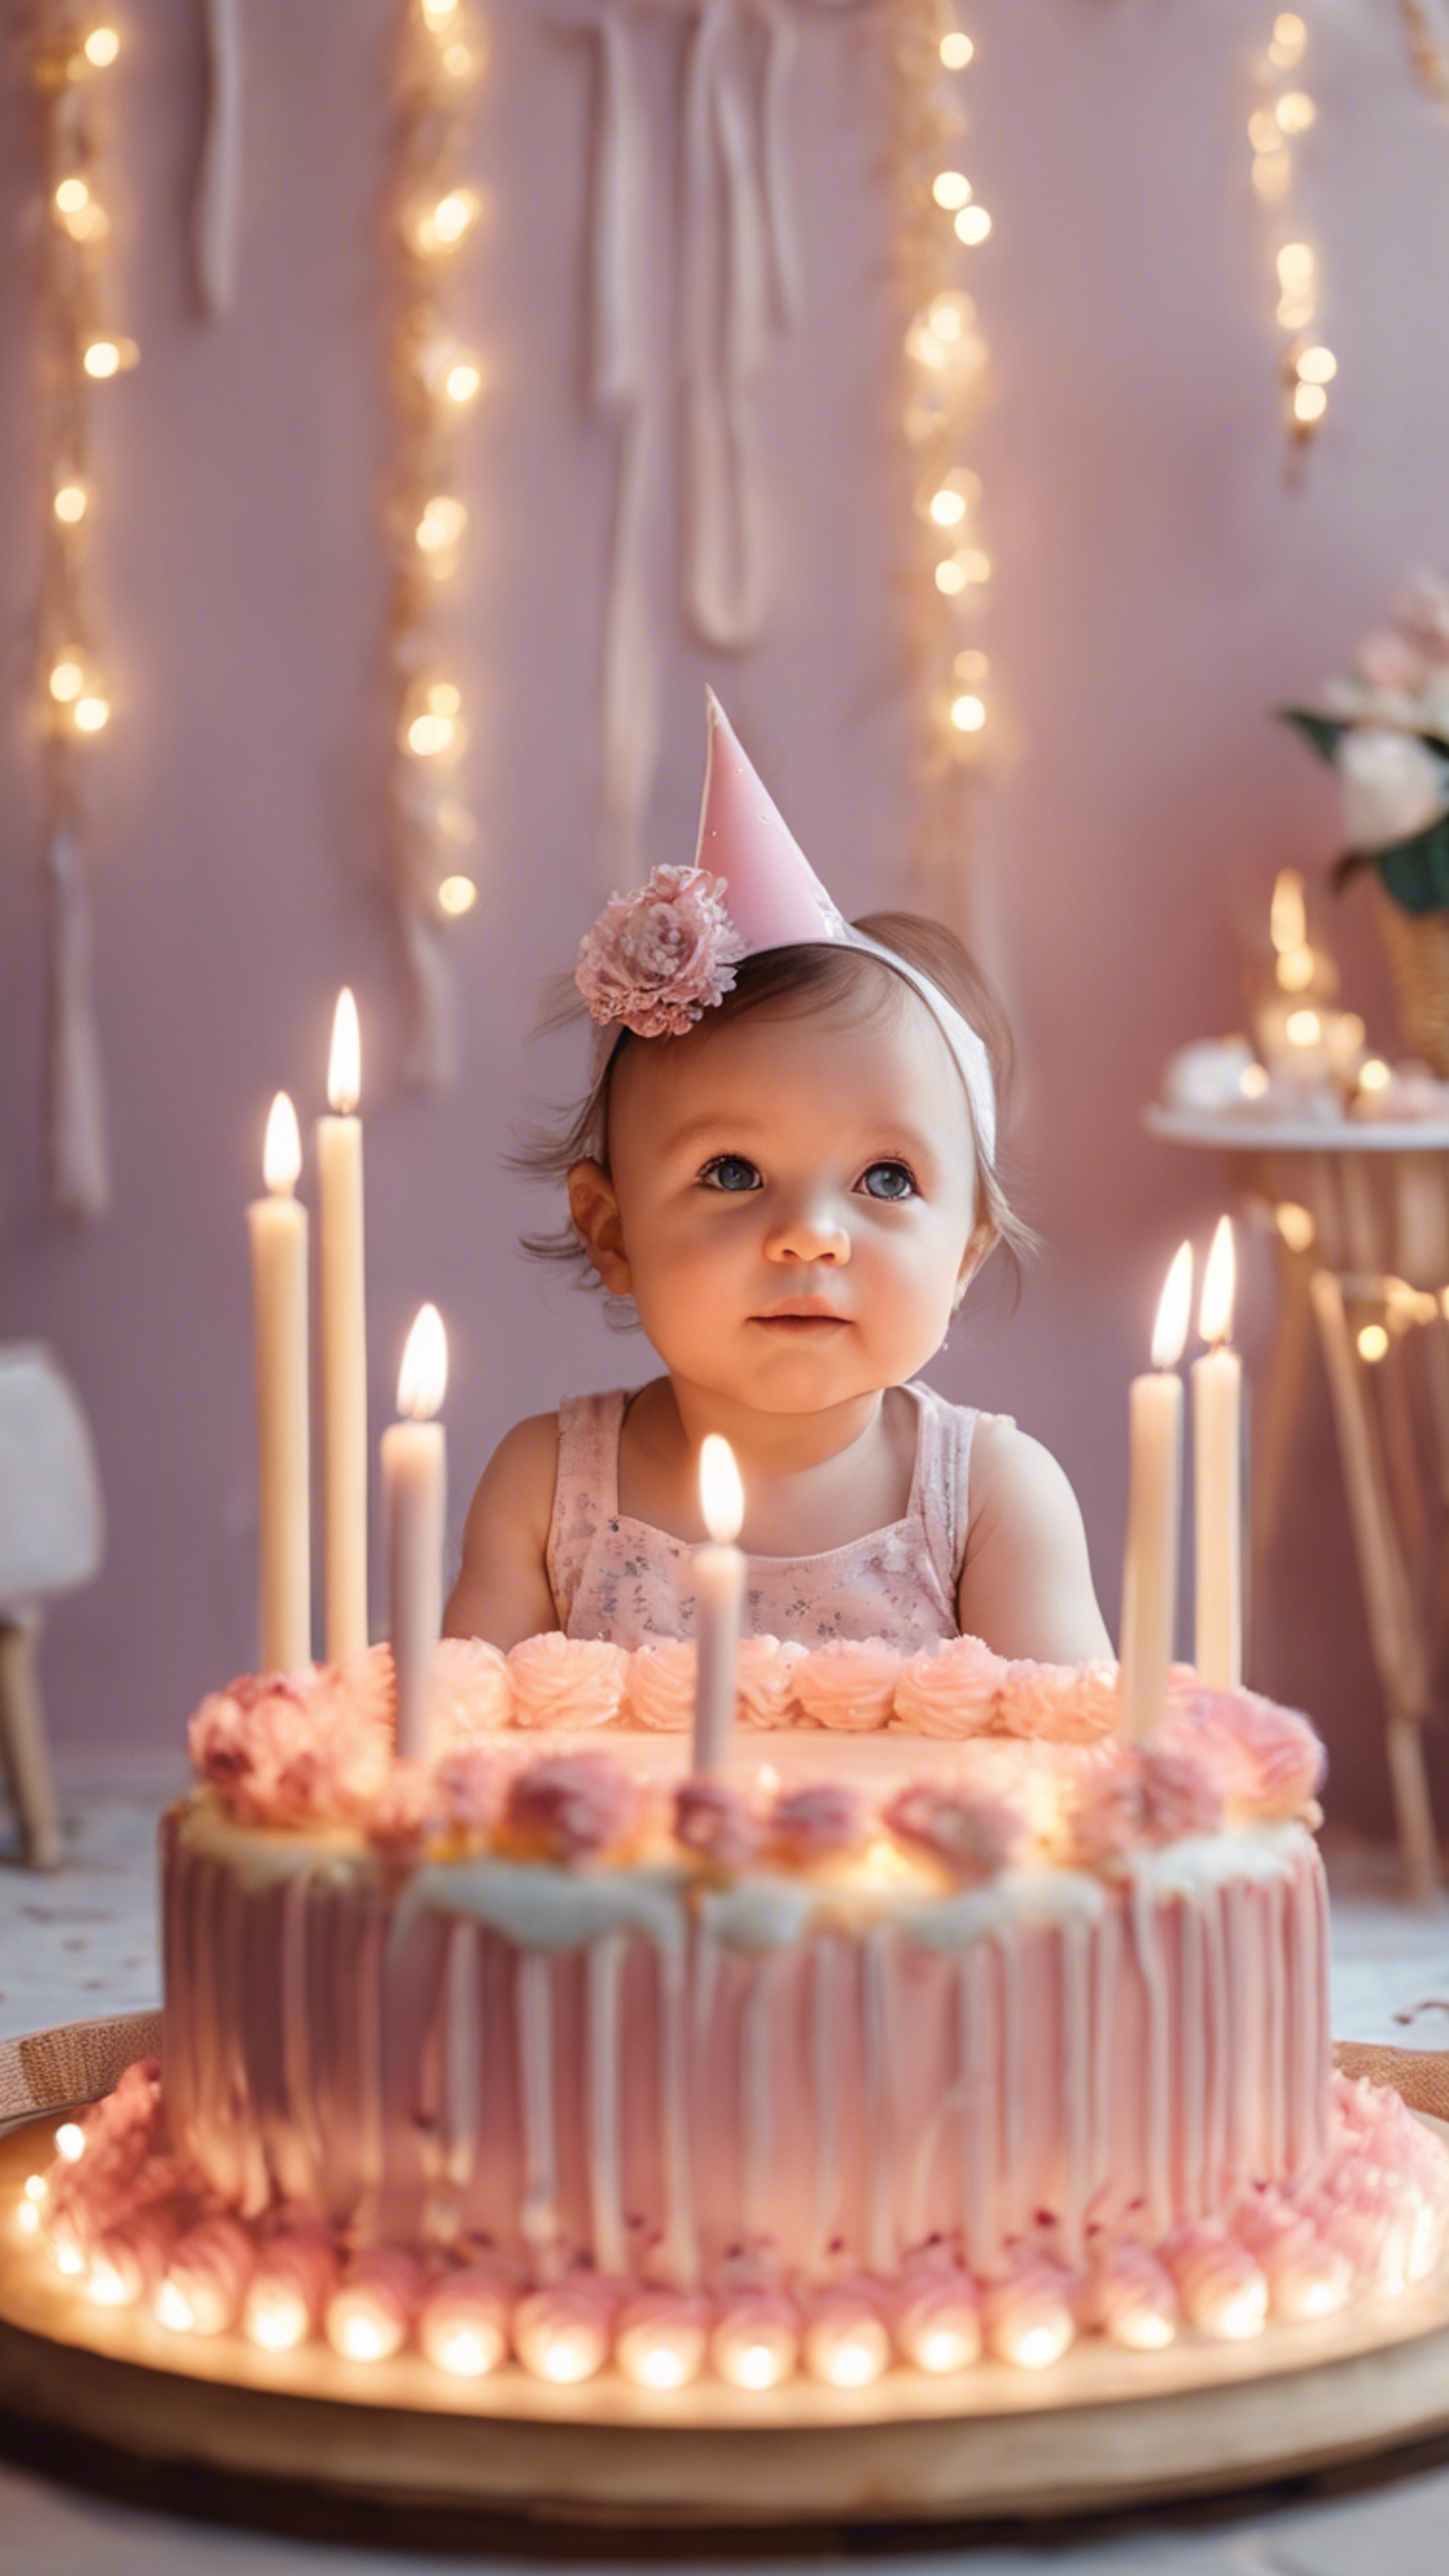 A baby girl sitting in front of a large birthday cake with one candle. Wallpaper[40d9127ac31741659290]